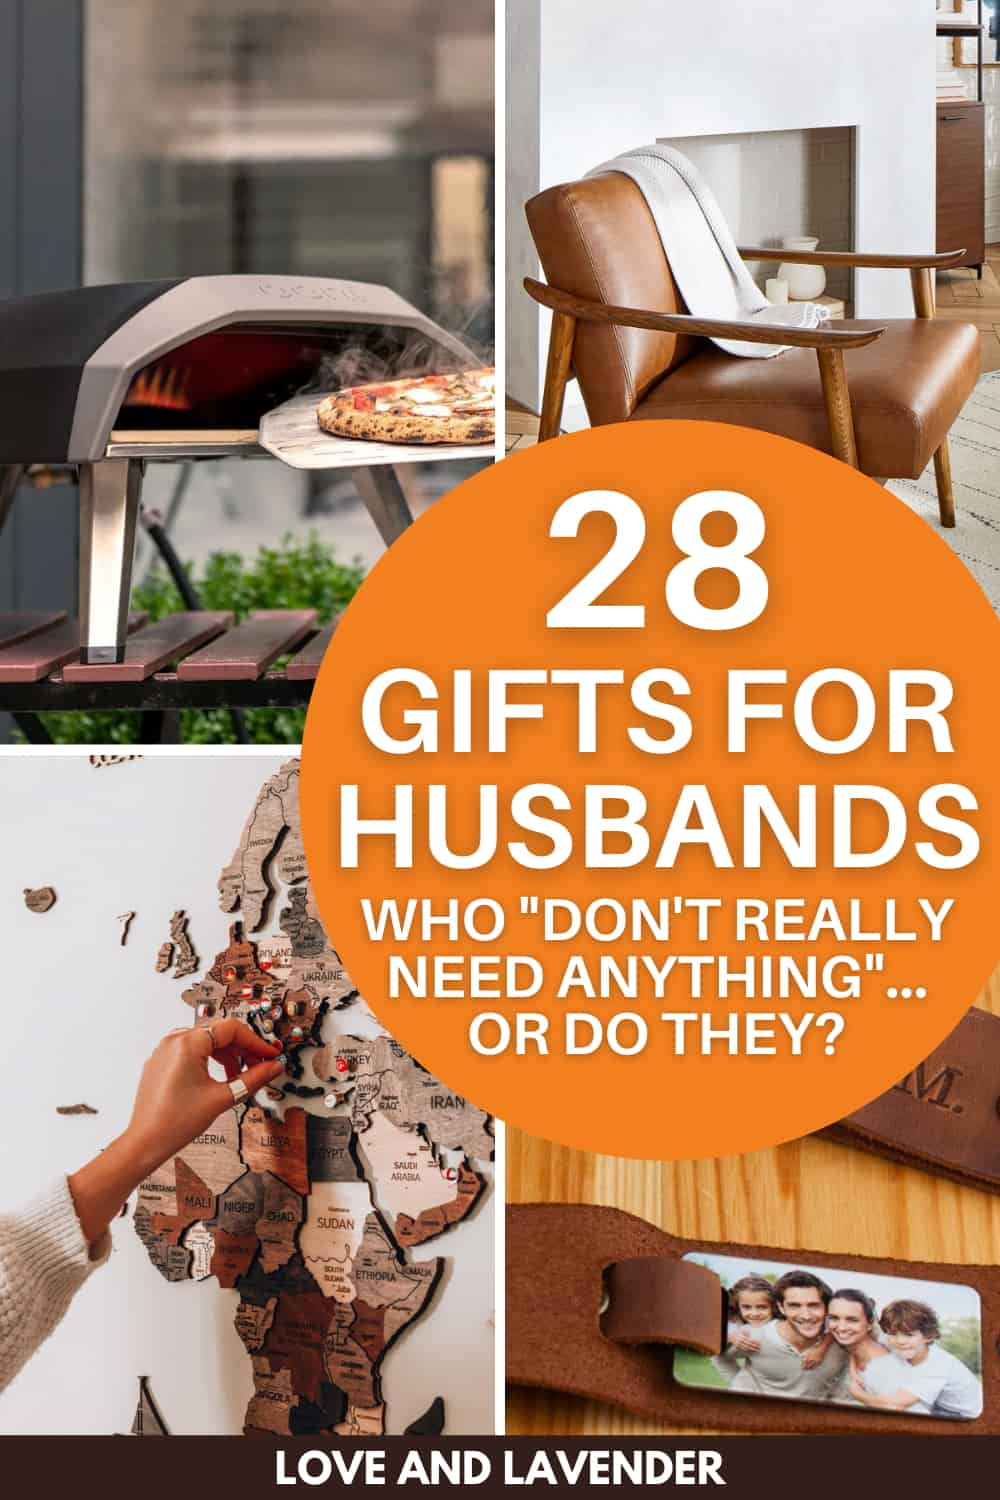 Pinterest Pin - Gifts for Husbands